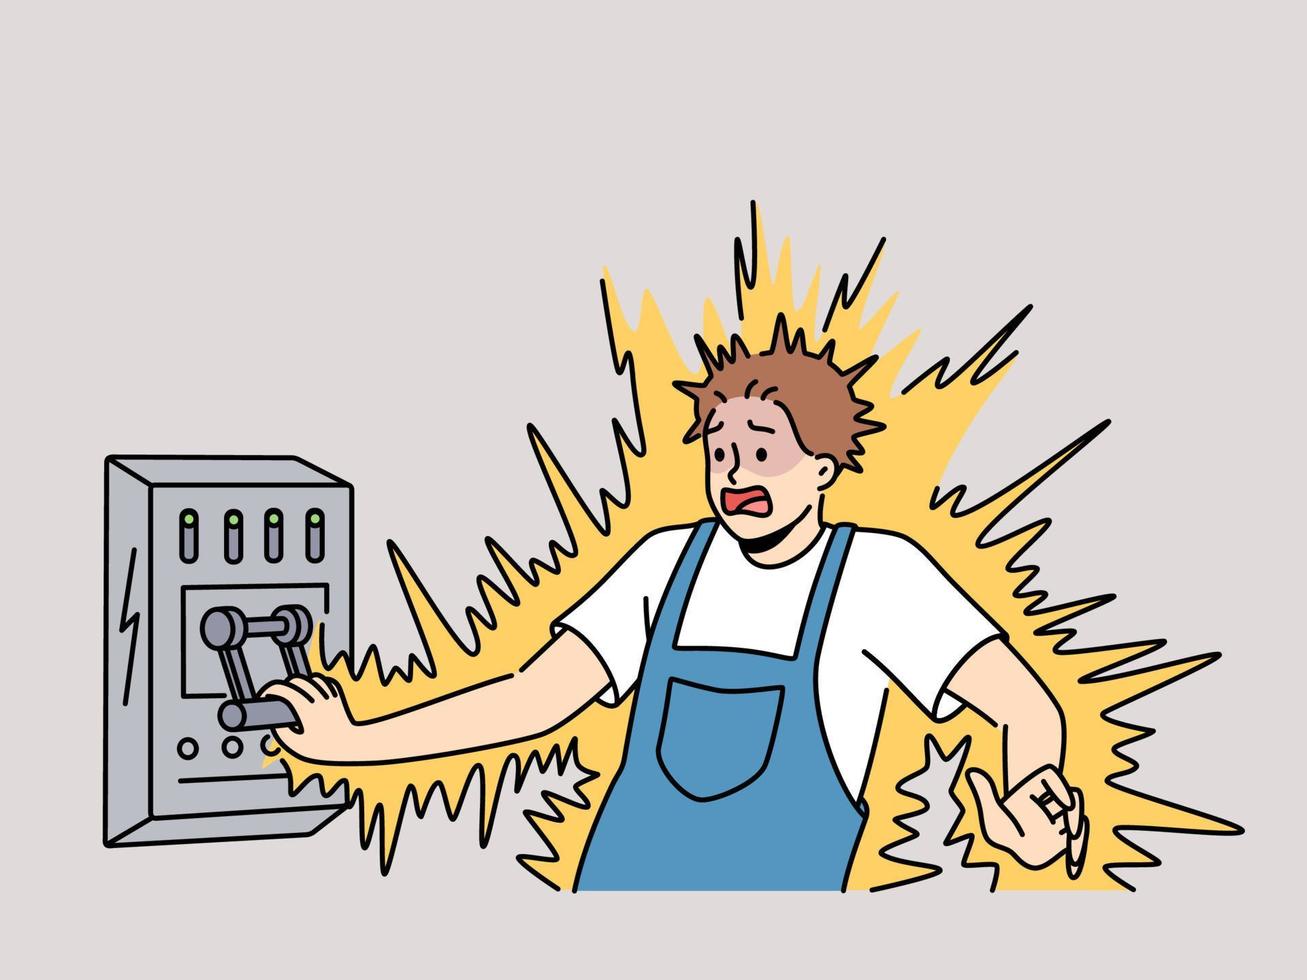 Man get electric shock from dashboard. Technician or mechanic suffer from electrical injury. Healthcare and danger. Vector illustration.